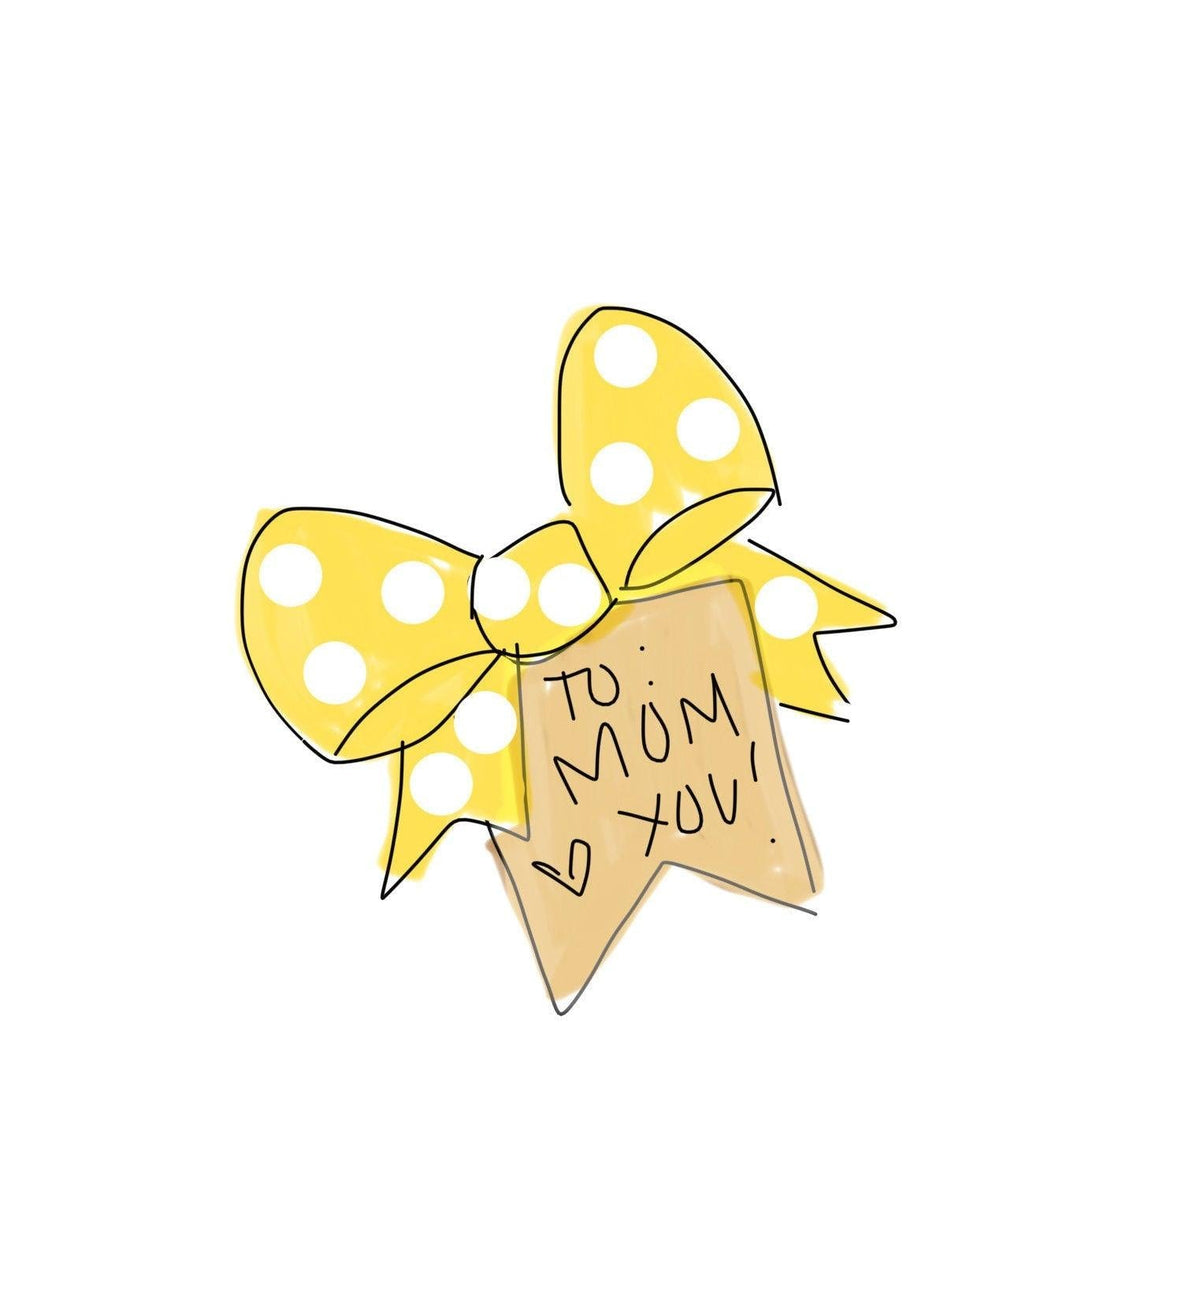 Bow with Tag Cookie Cutter - Sweetleigh 